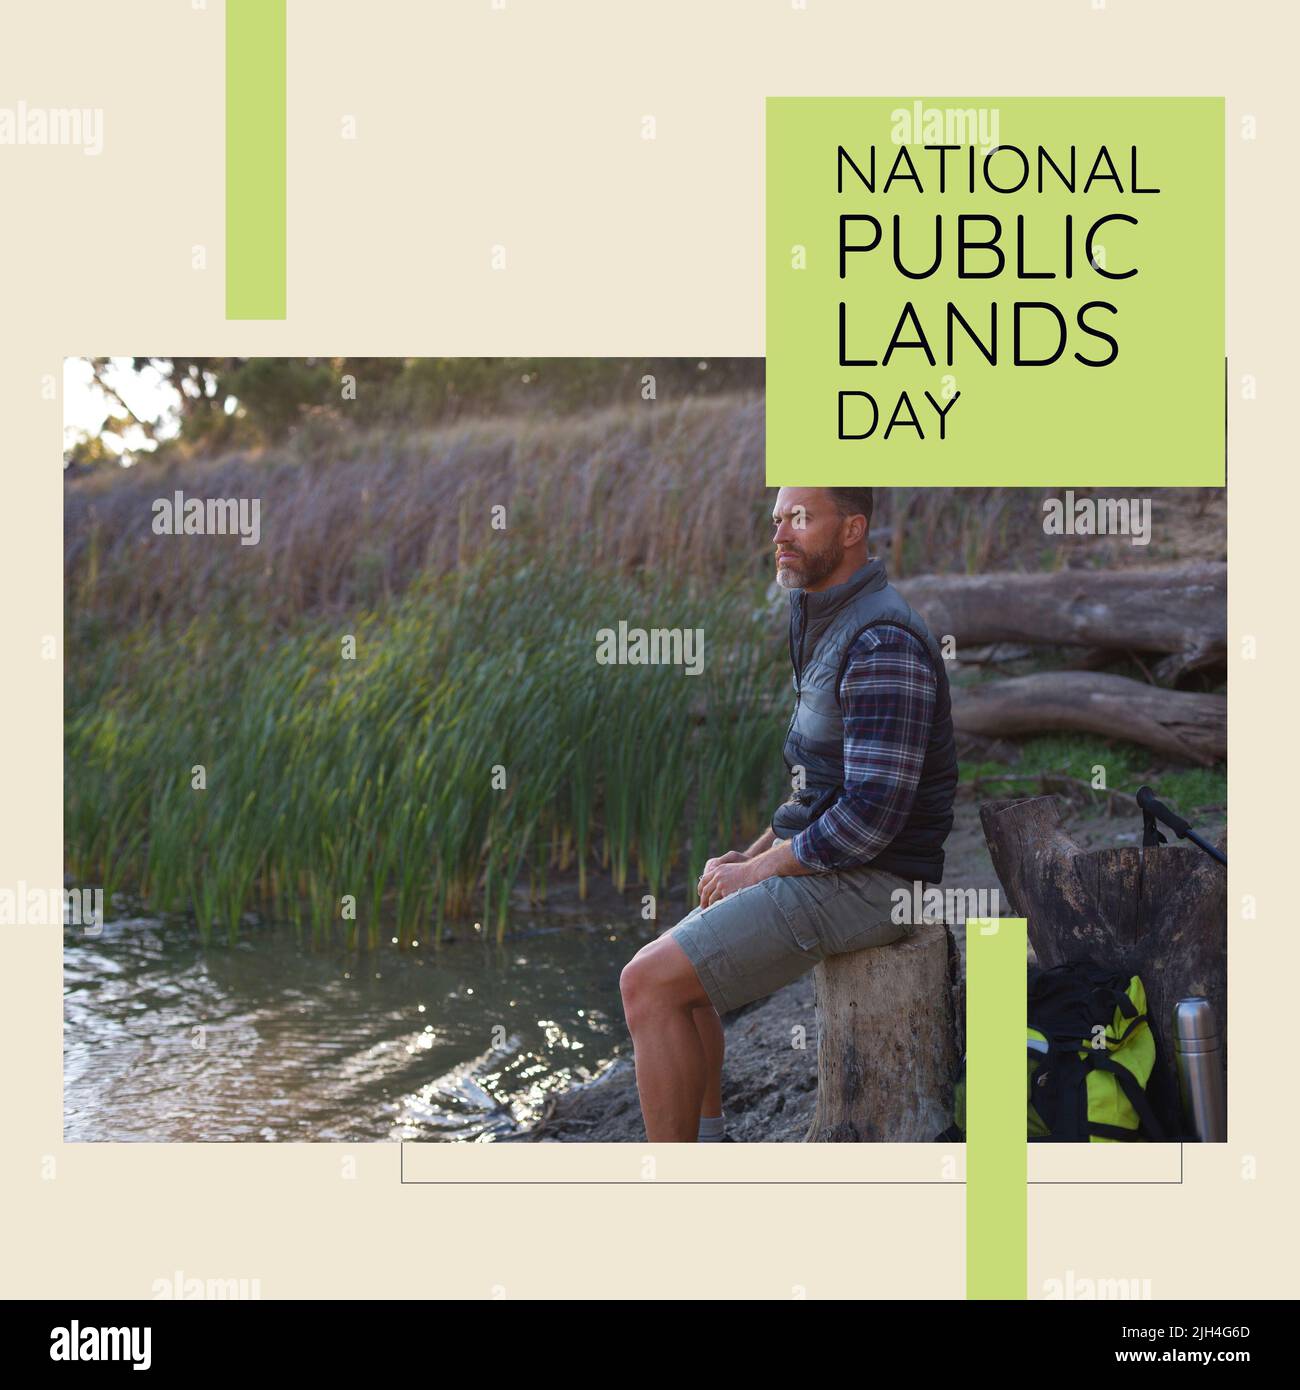 Composition of national public lands day text with caucasian man on beige background Stock Photo